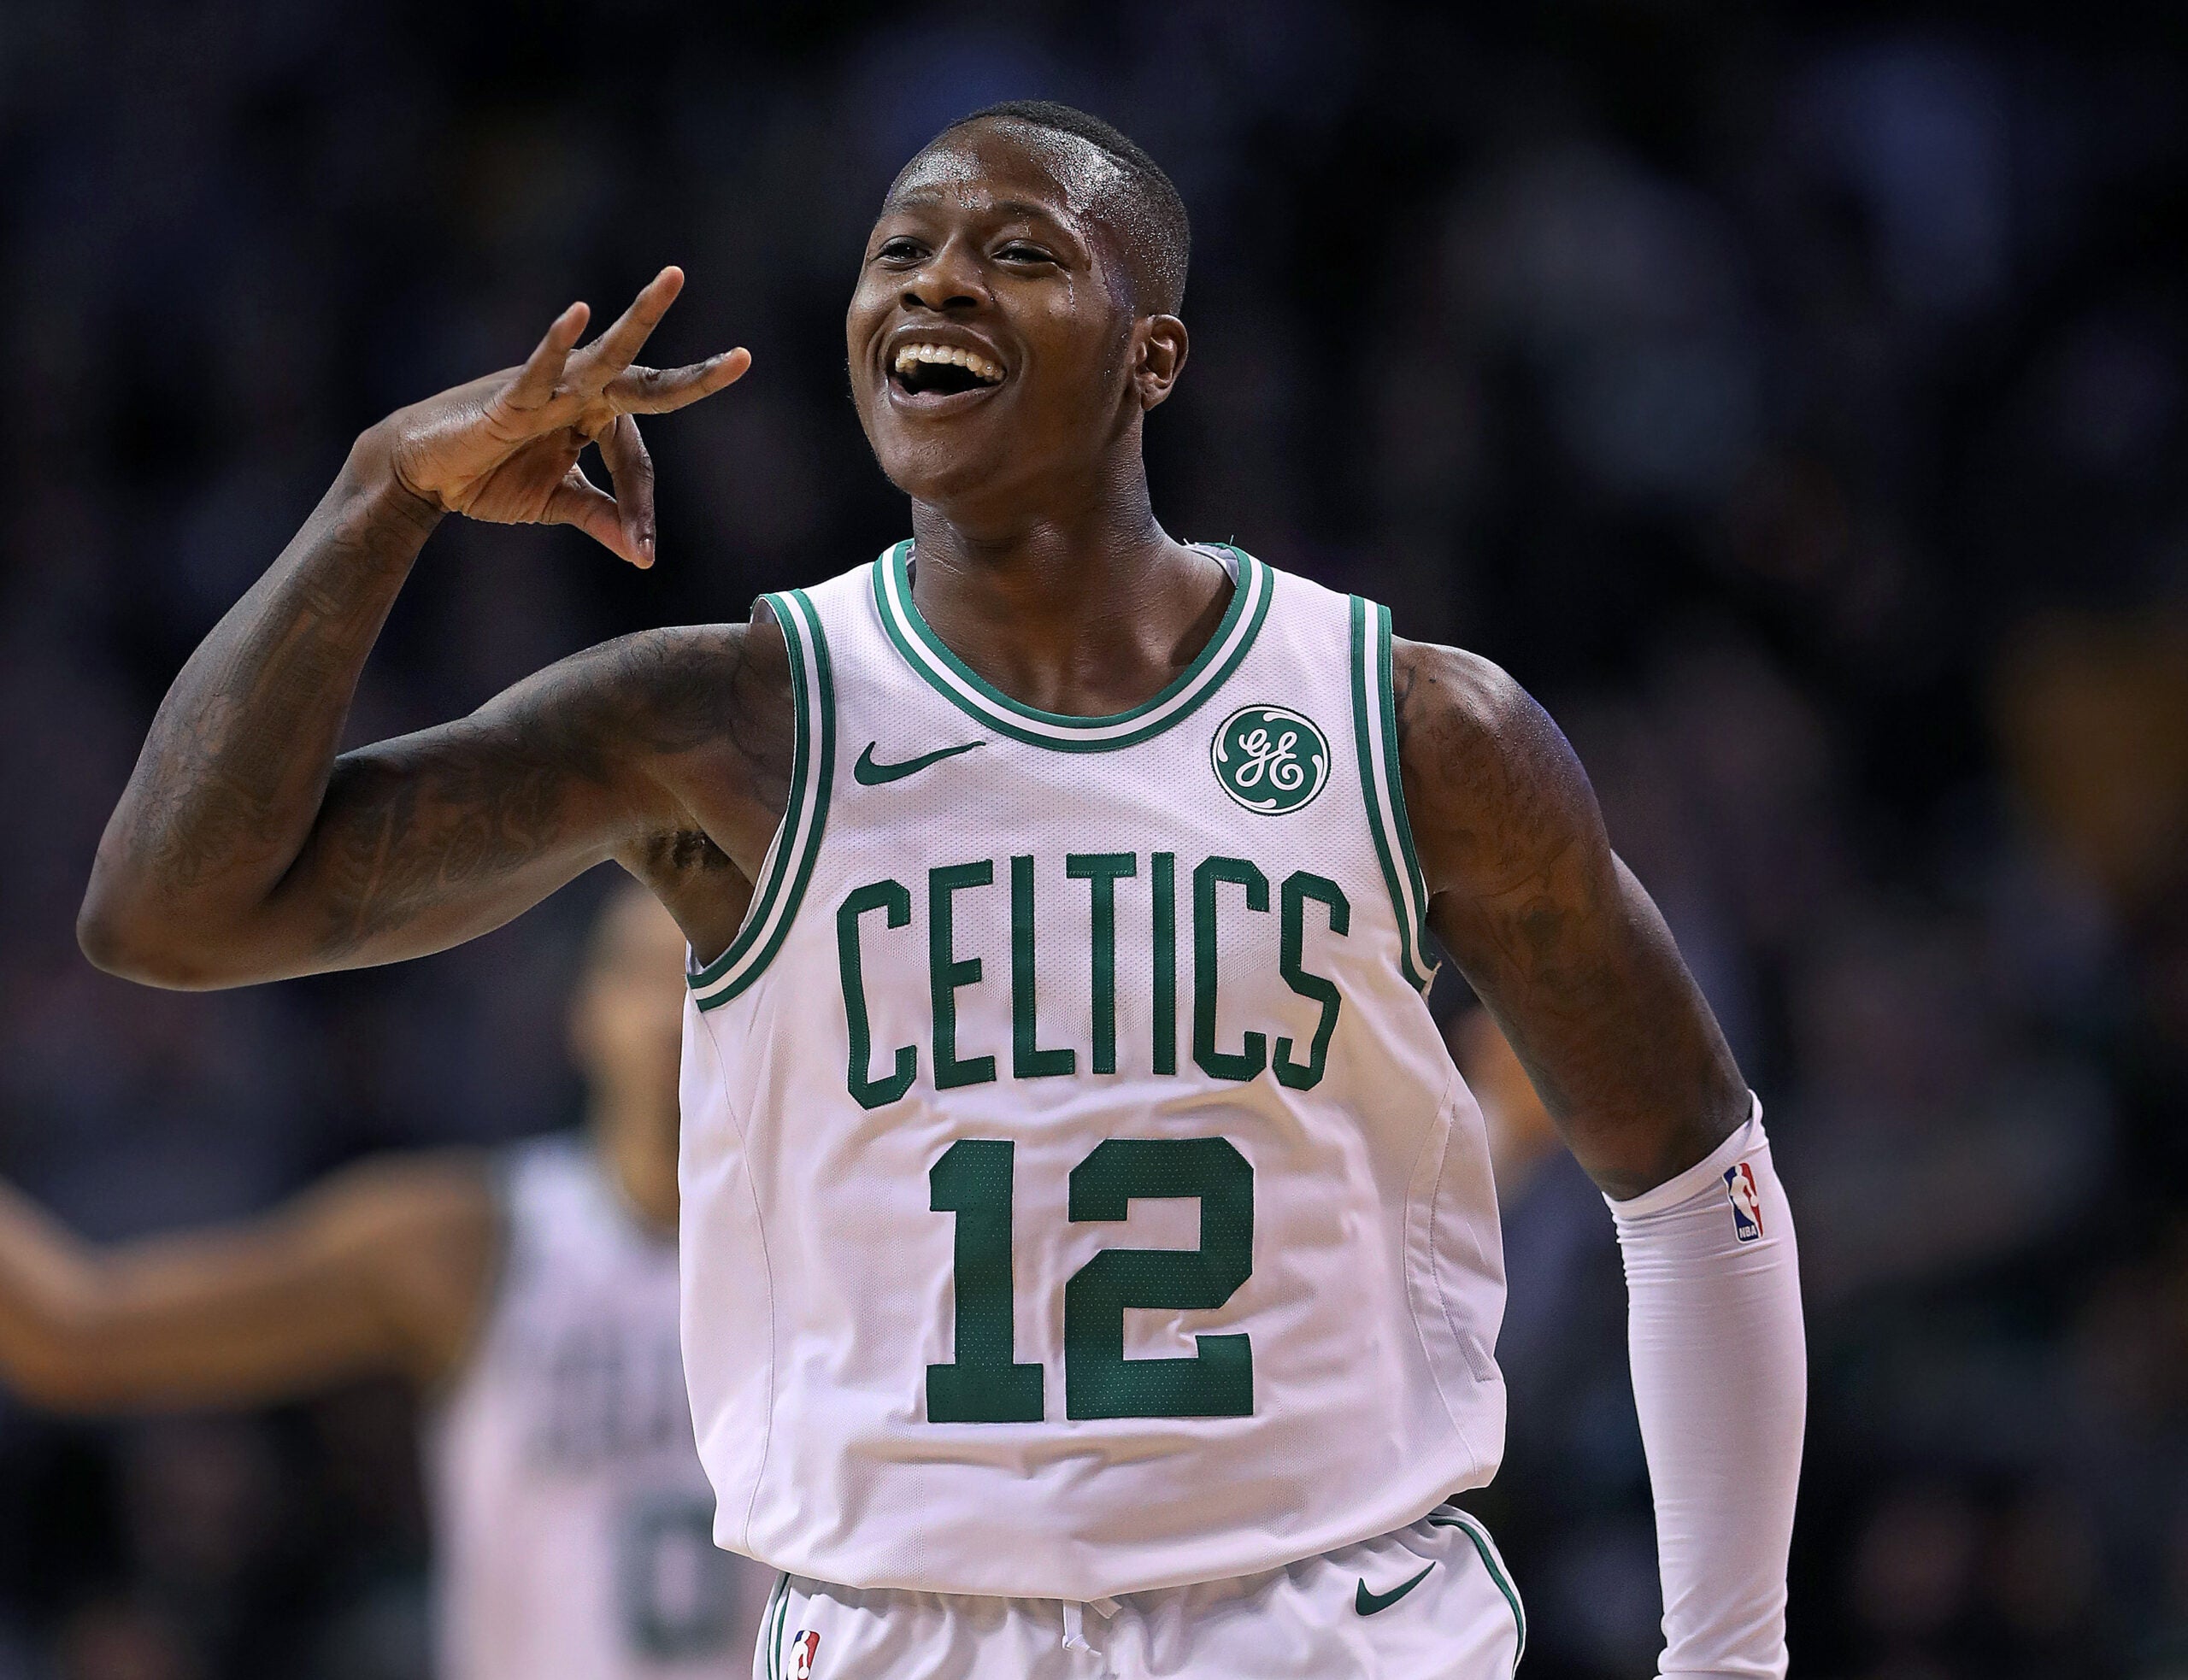 Here's how 'Scary Terry' Rozier came to be a thing - The Boston Globe